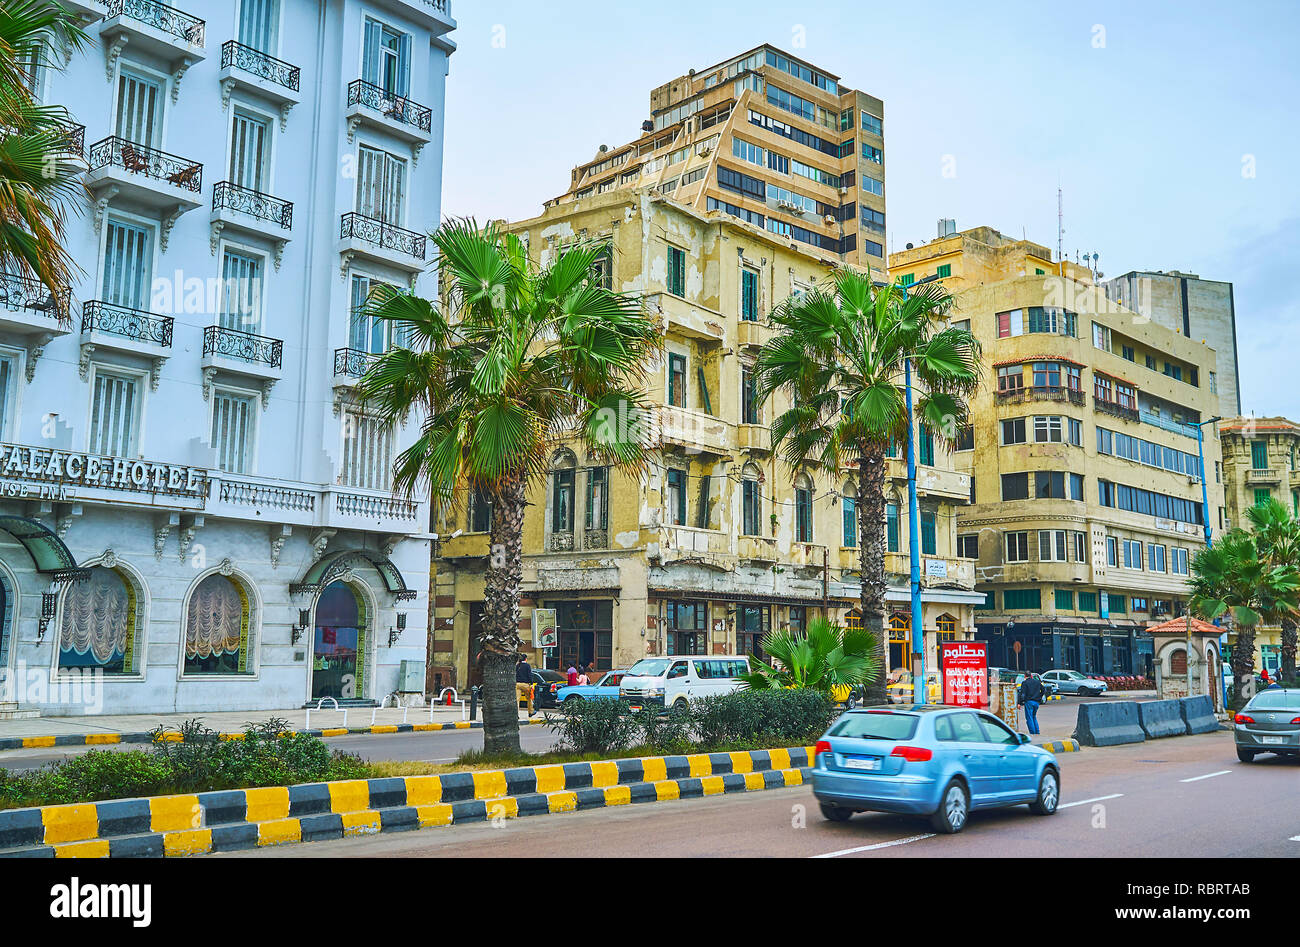 ALEXANDRIA, EGYPT - DECEMBER 19, 2017: The line of historic edifices along the Corniche Avenue, serving as hotels, stores, restaurants, living or admi Stock Photo